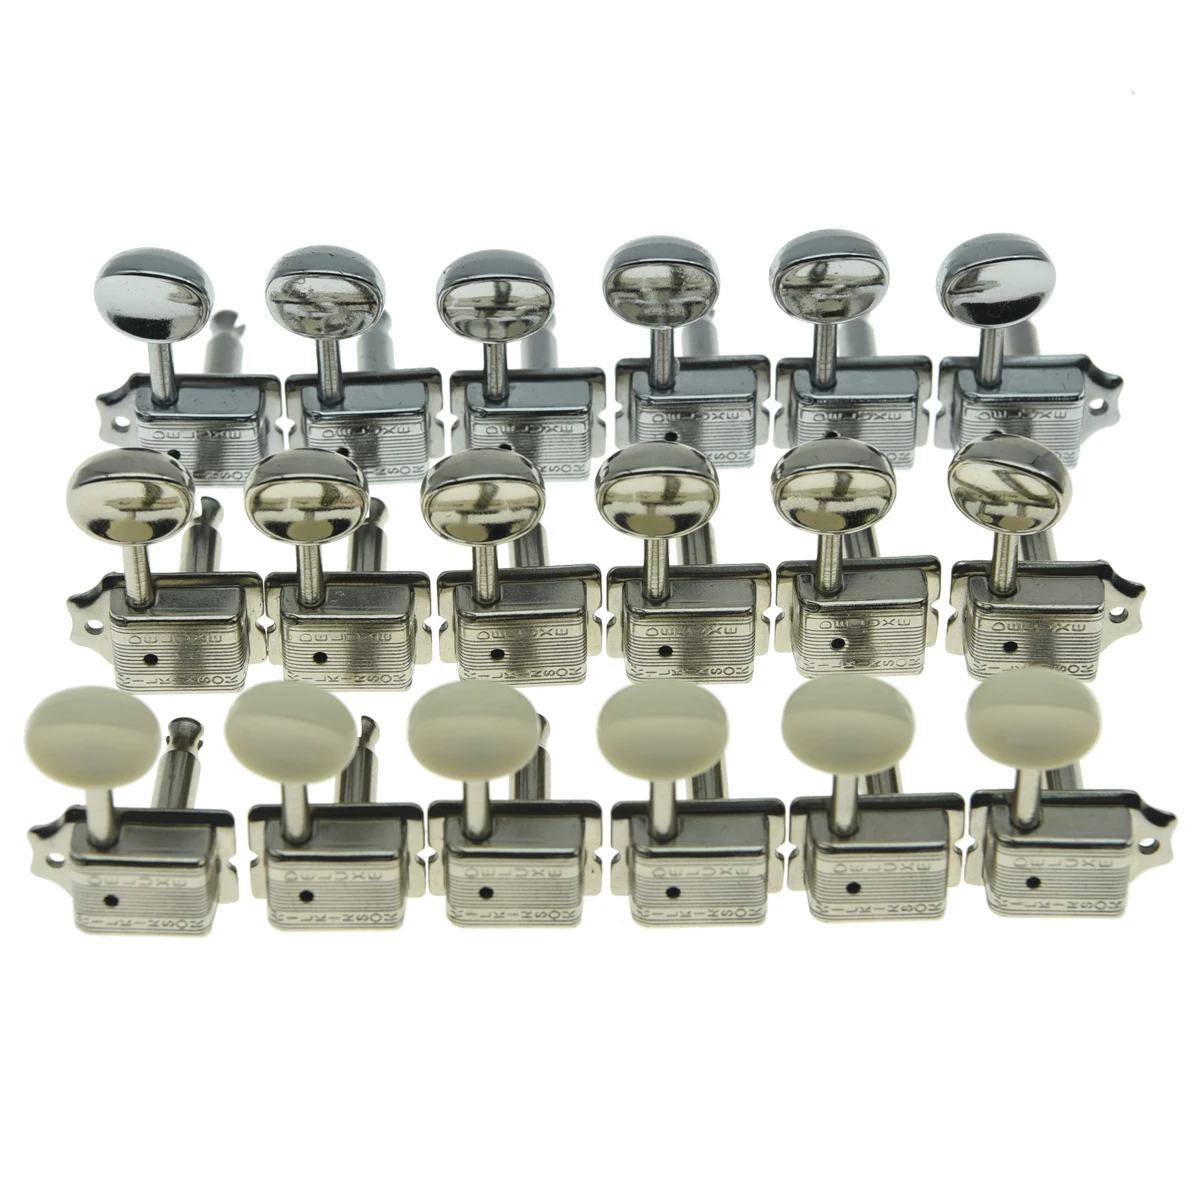 Wilkinson Deluxe 6 Inline Vintage Guitar Tuners with Split Post Guitar Tuning Keys Peg Machine Heads for Strat/Tele Guitars Chrome 